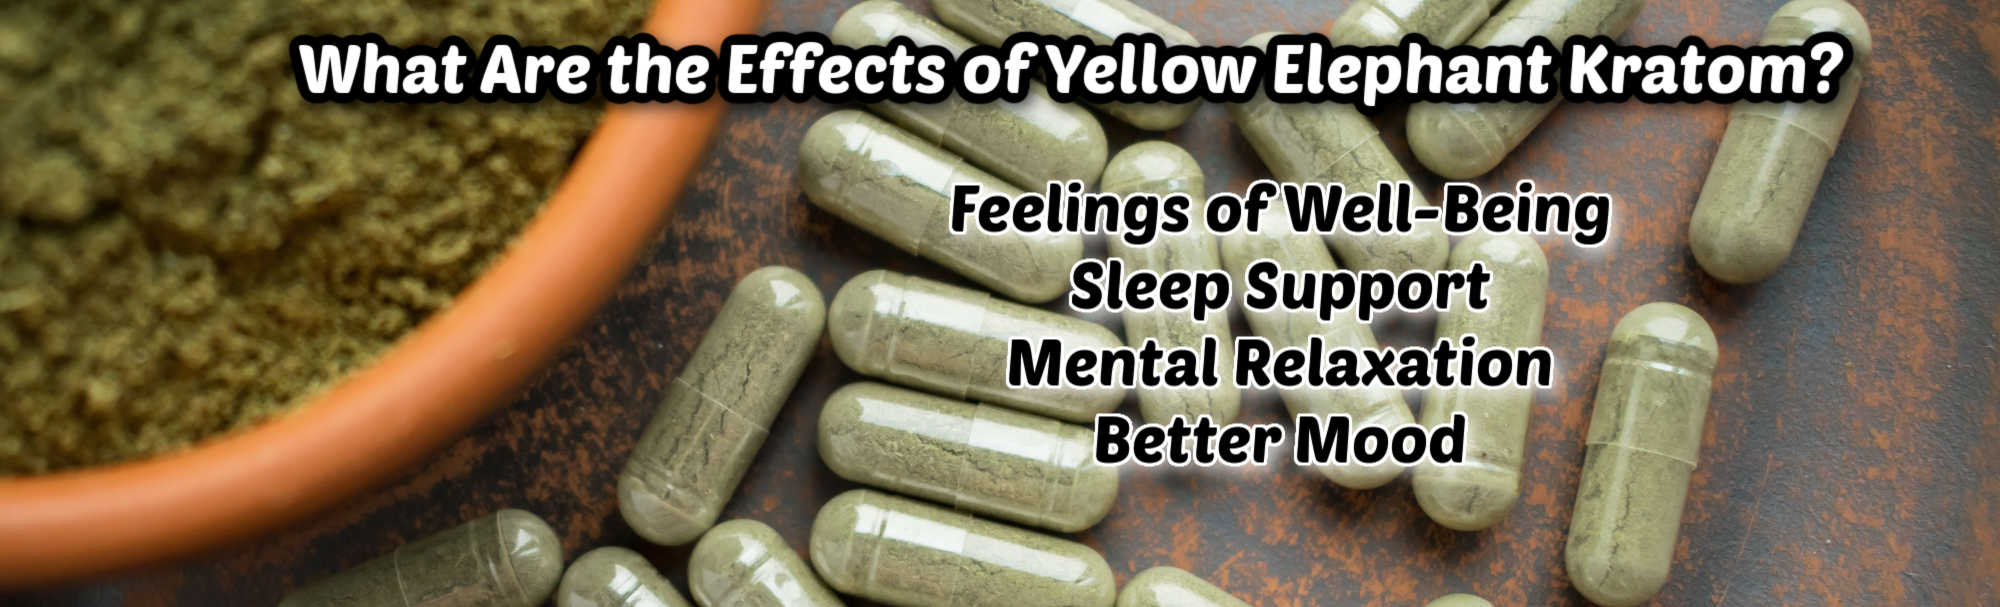 Yellow Elephant Kratom Effects : Why You Should Stick to the Right Doses